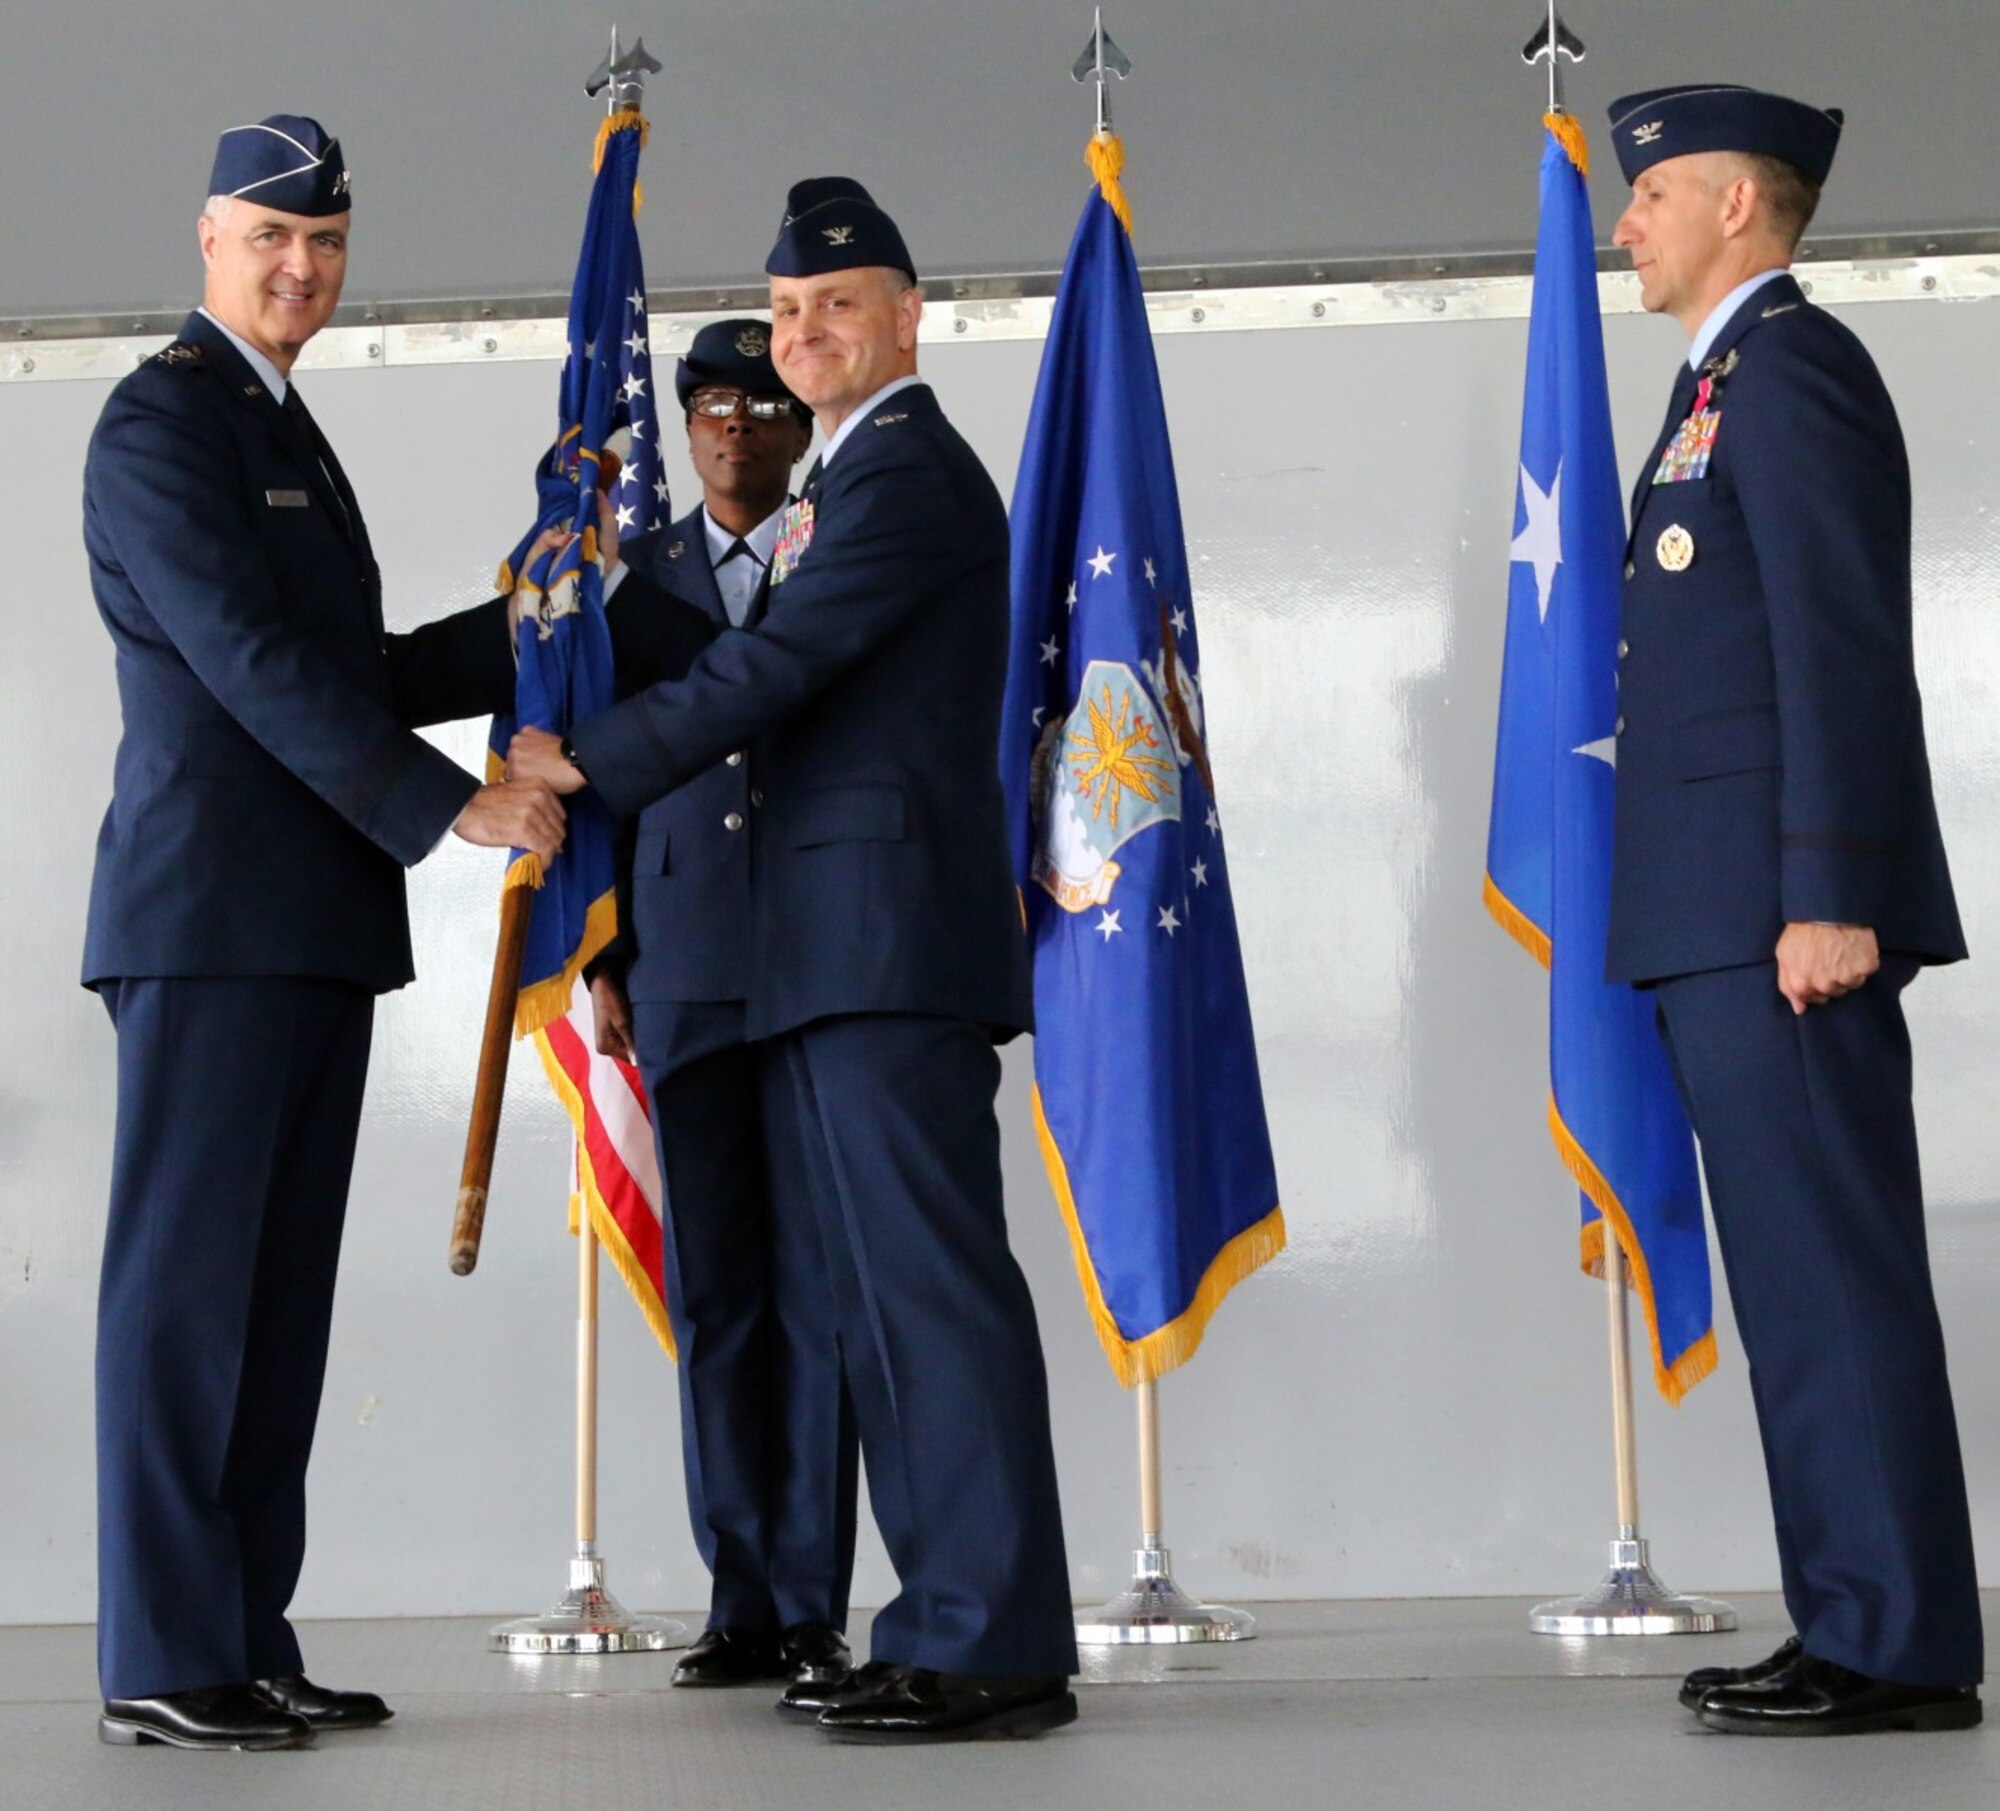 U.S. Air Force Col. Mark Wootan (center) receives the CAP-USAF guidon, emblematic of command, from Lt. Gen. R. Scott Williams, Commander, Continental U.S. North American Aerospace Defense Command Region –1st Air Force (Air Forces Northern). At their left is Wootan’s predecessor as CAP-USAF commander, Col. Michael Tyynismaa. (CAP-USAF courtesy photo)